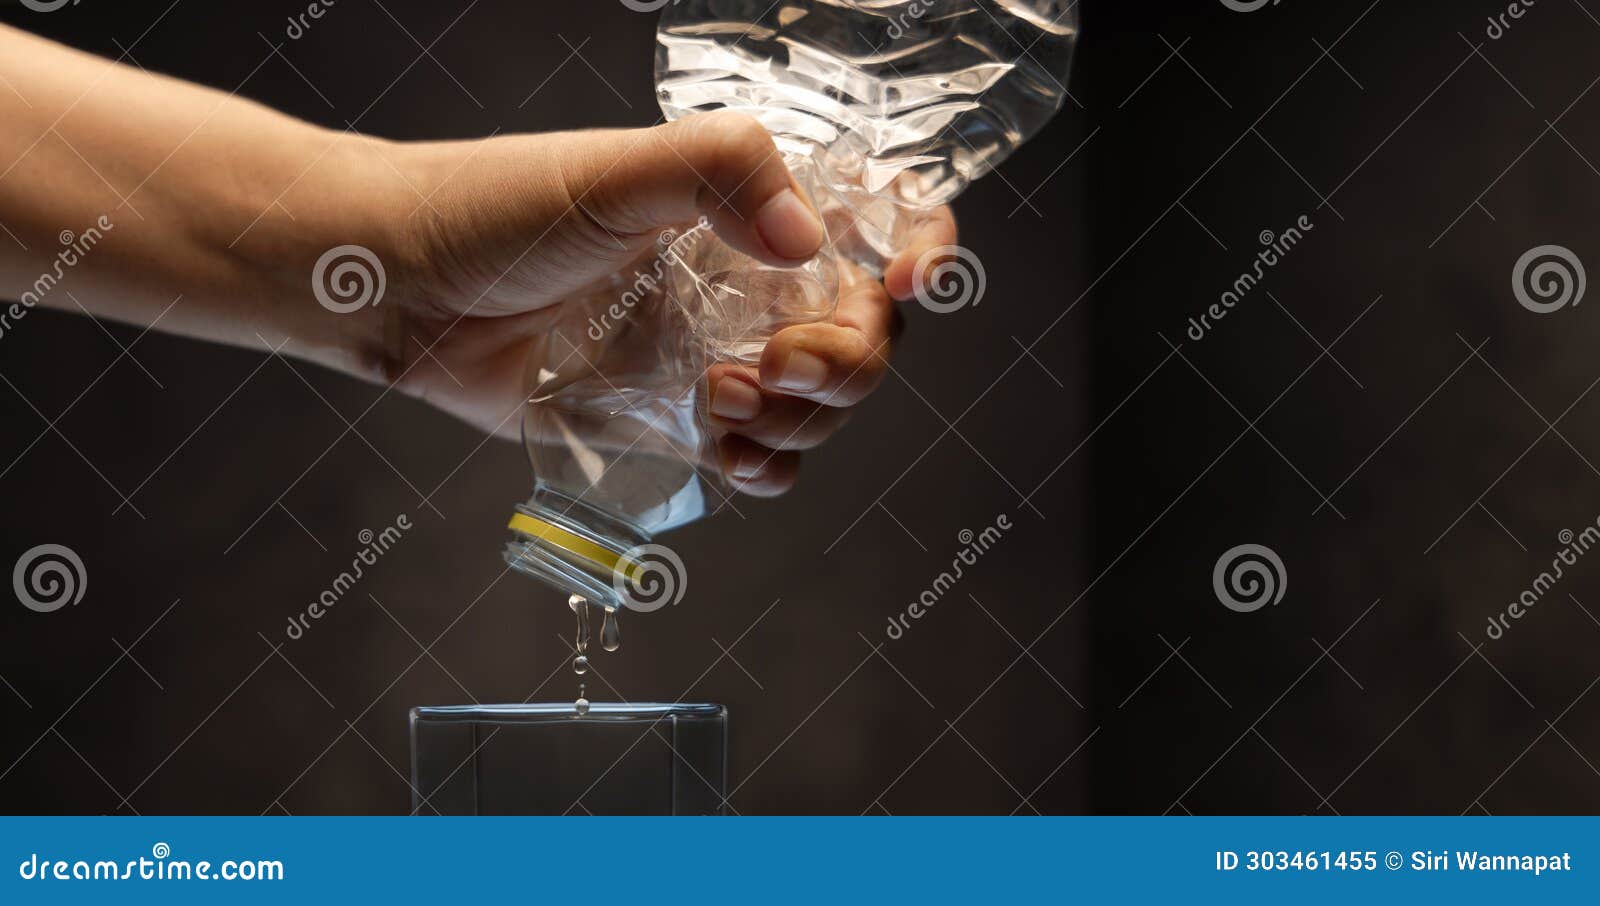 water crisis, climate change, el nino, global warming issue concept. hand trying to squeeze water from a bottle